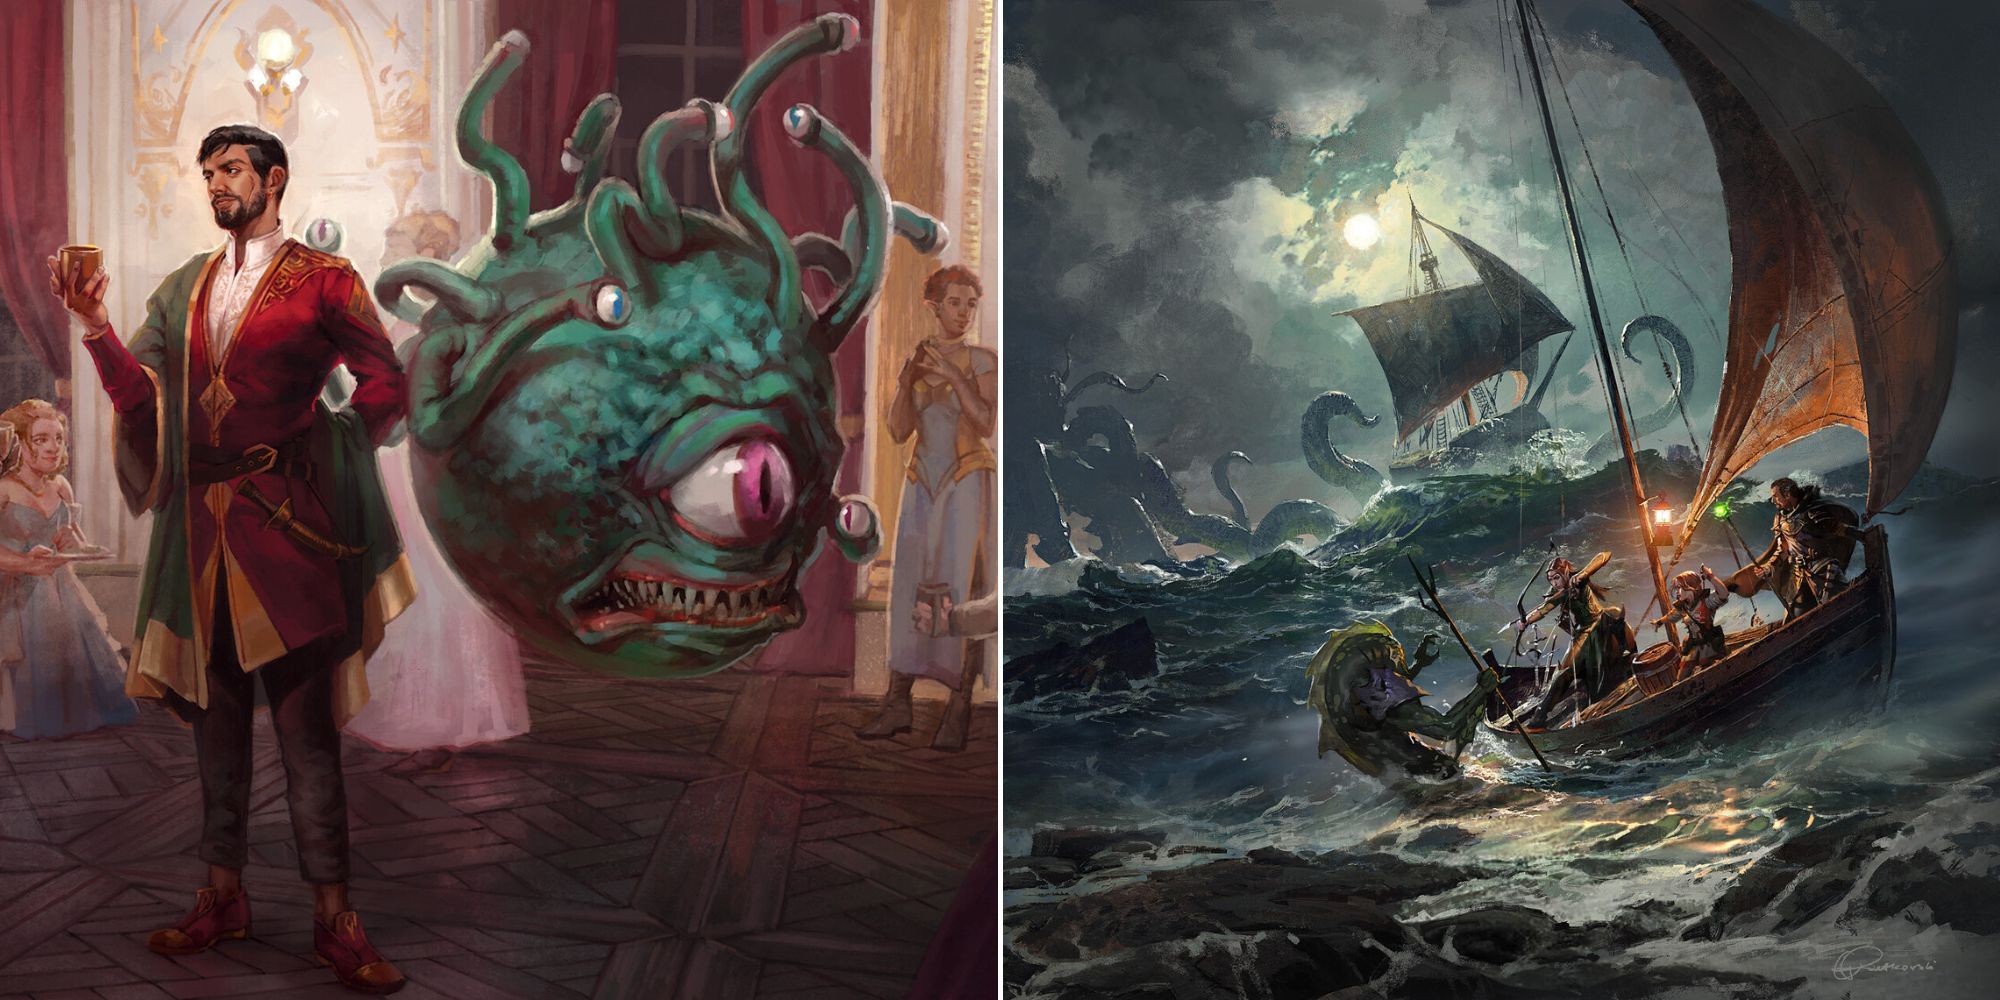 D&D Artwork Of A Beholder At A Party Next To A Bard And Pirate Ships Being Attacked By Sea Beasts.